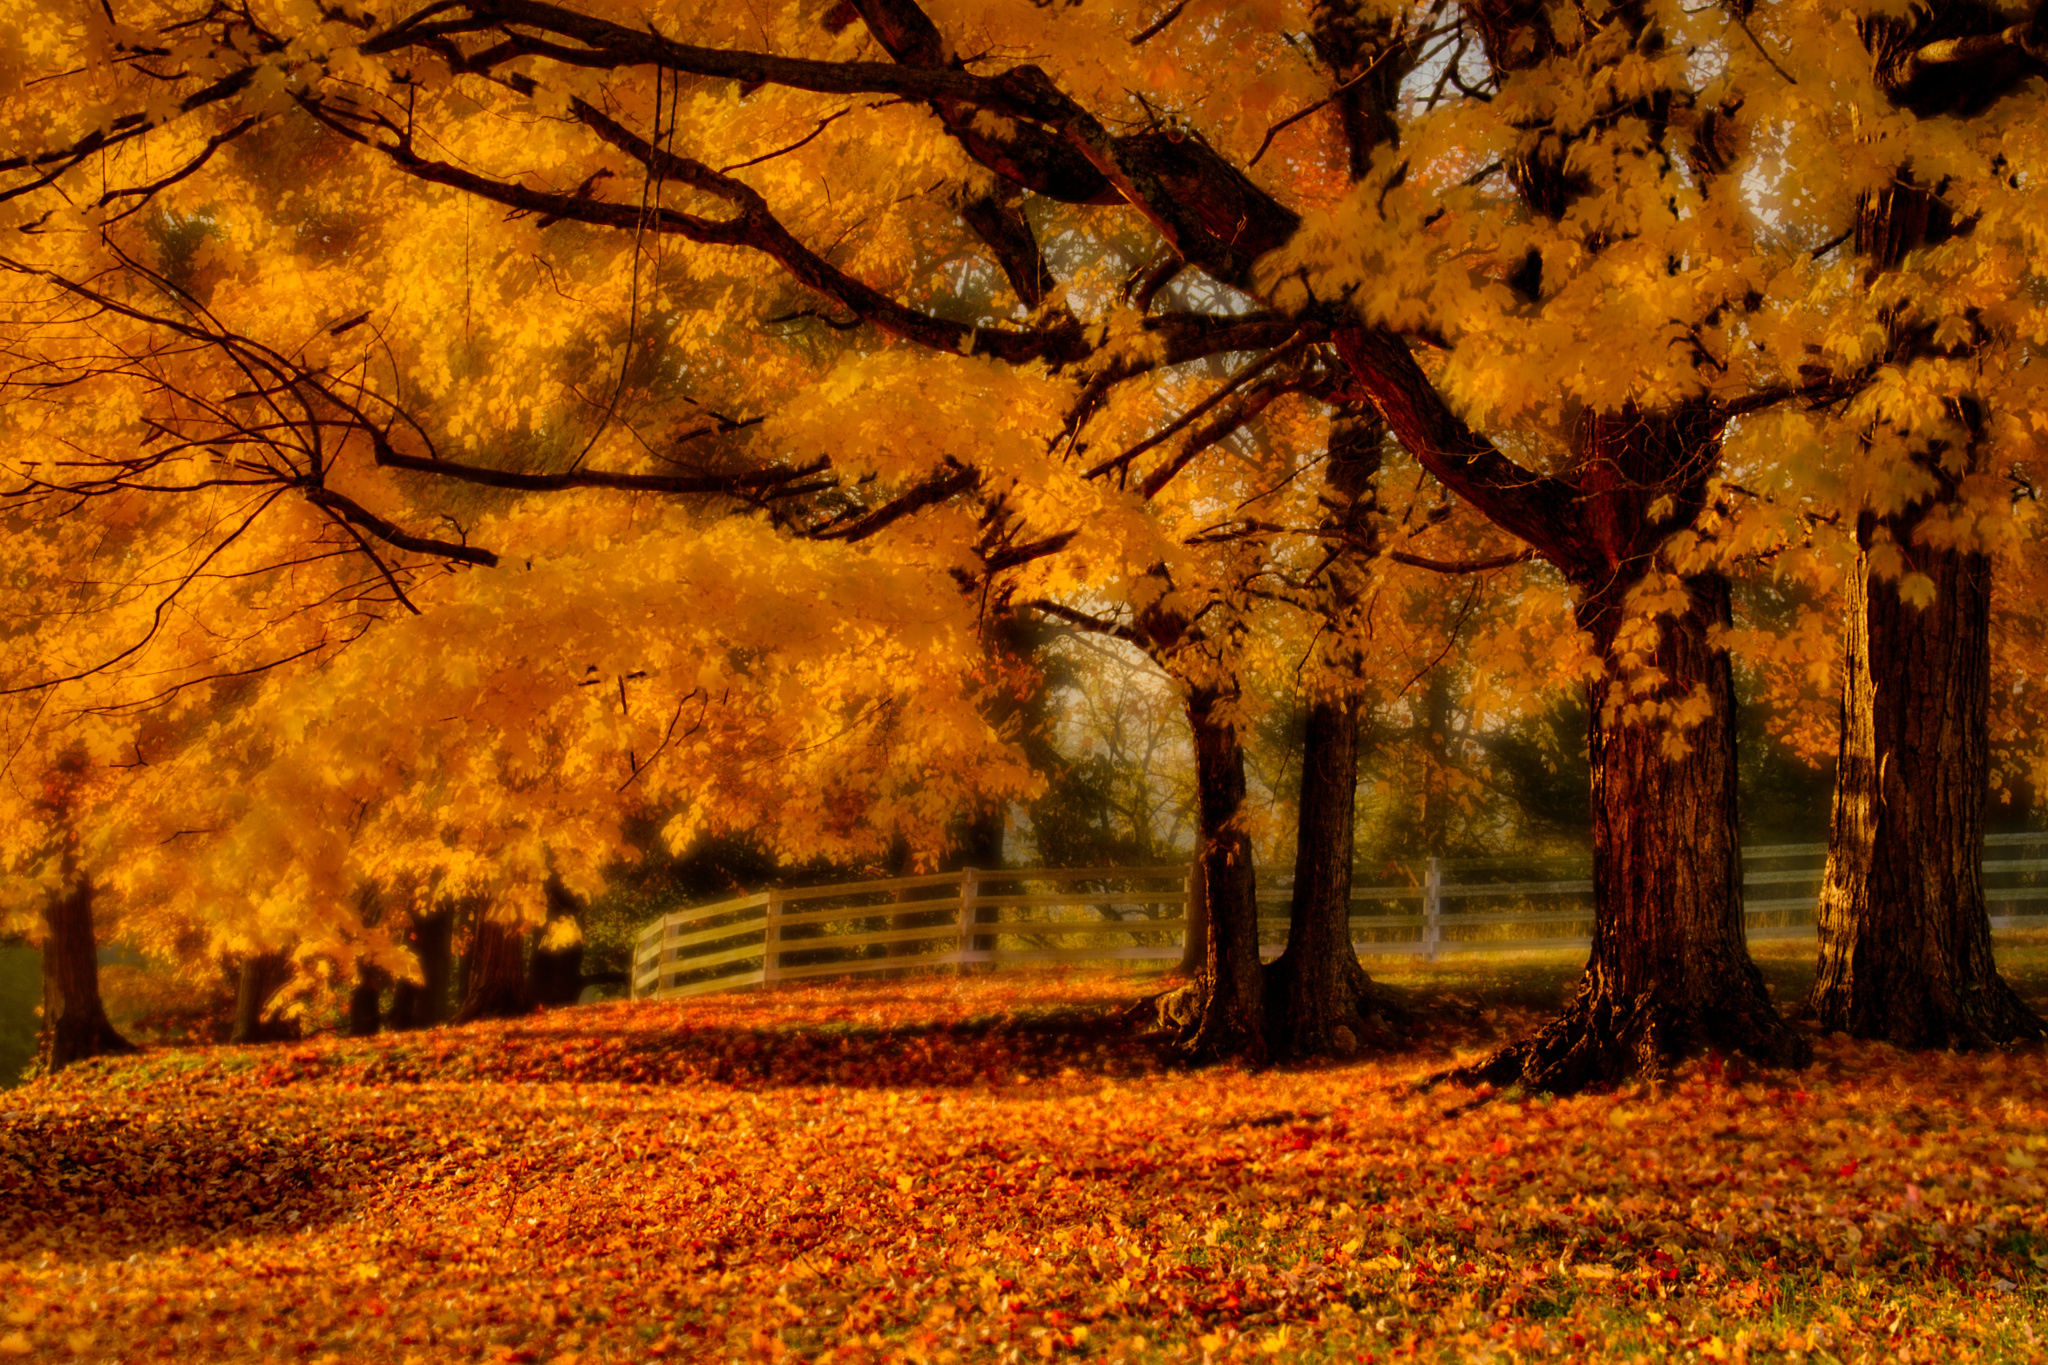 Glowing Leaves of Fall by Richard Barrow on 500px | A WaLk In The ...